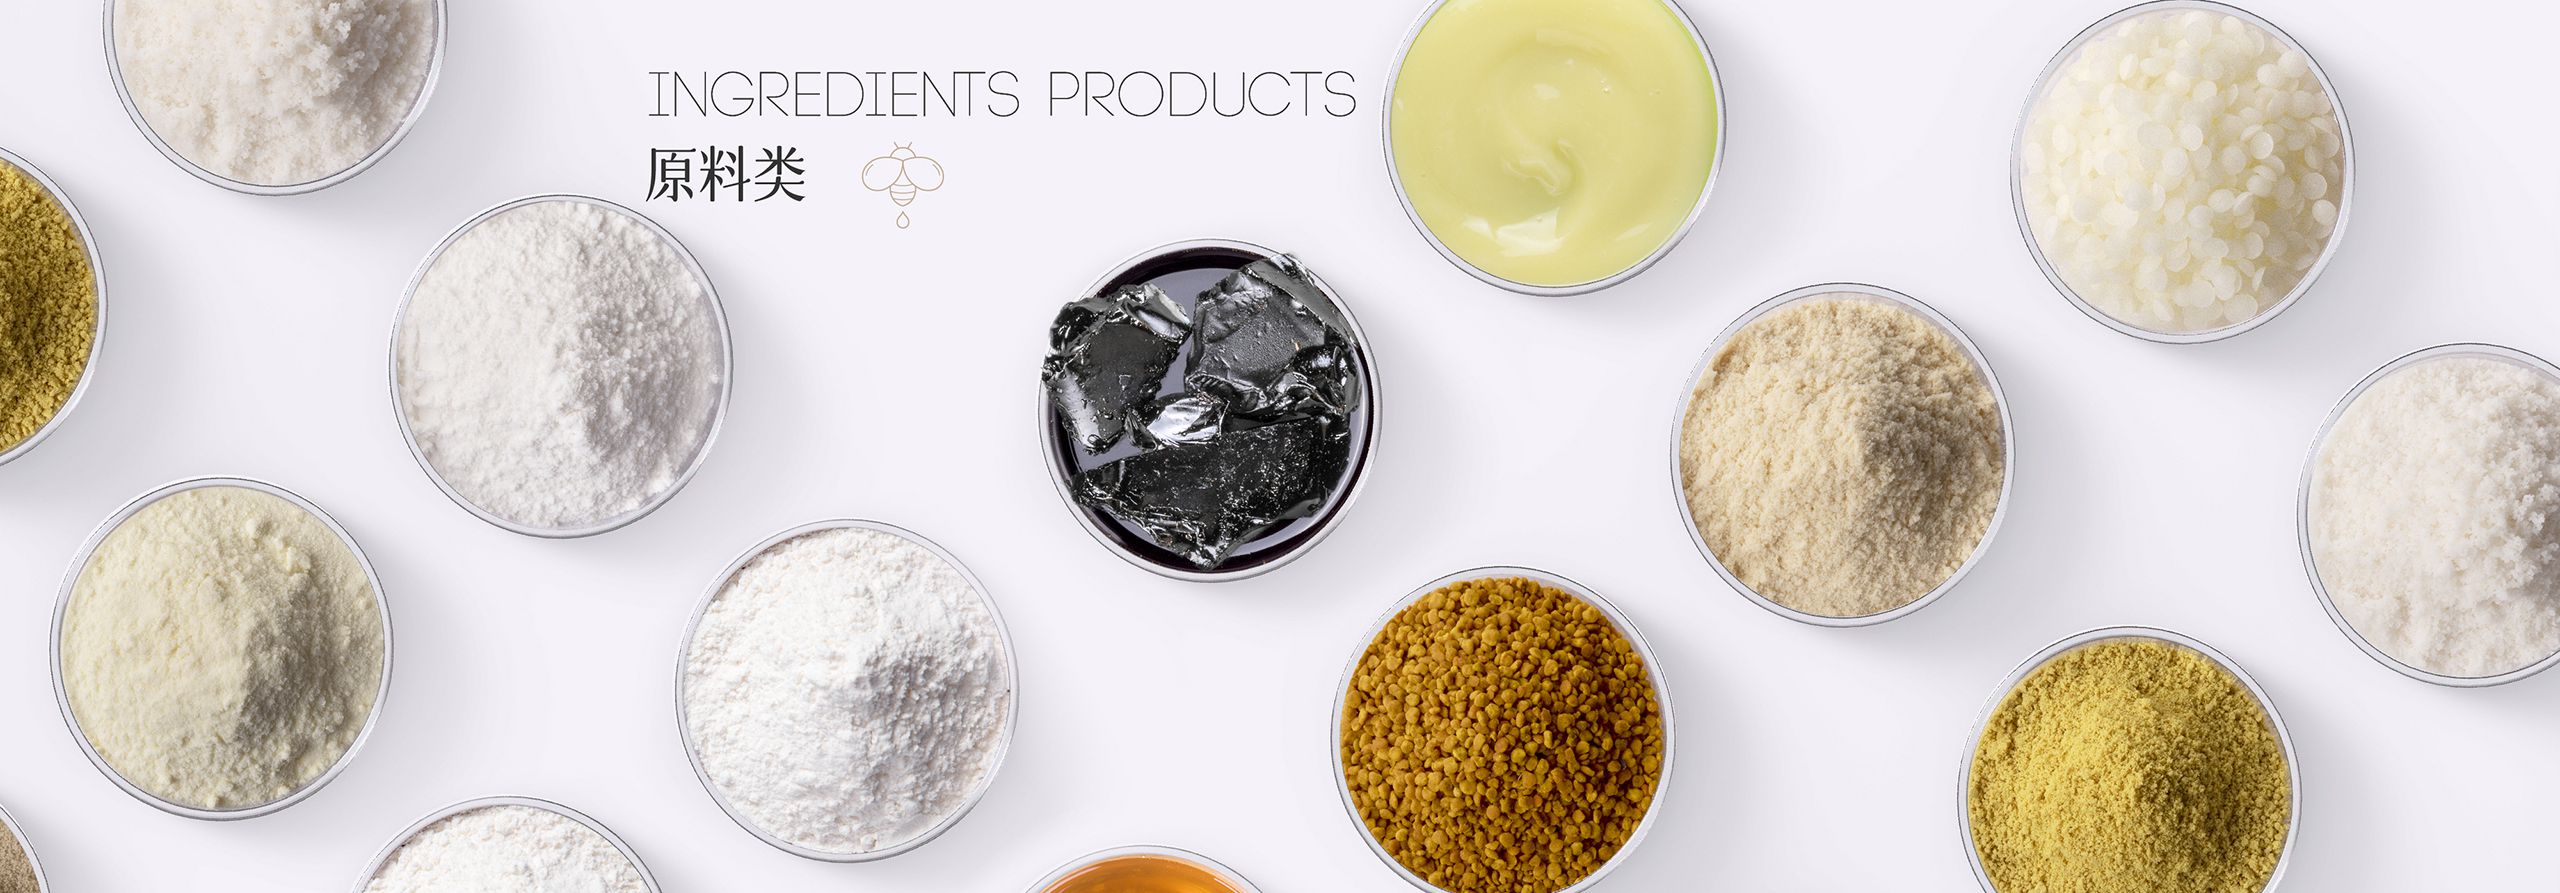 Ingredients Products